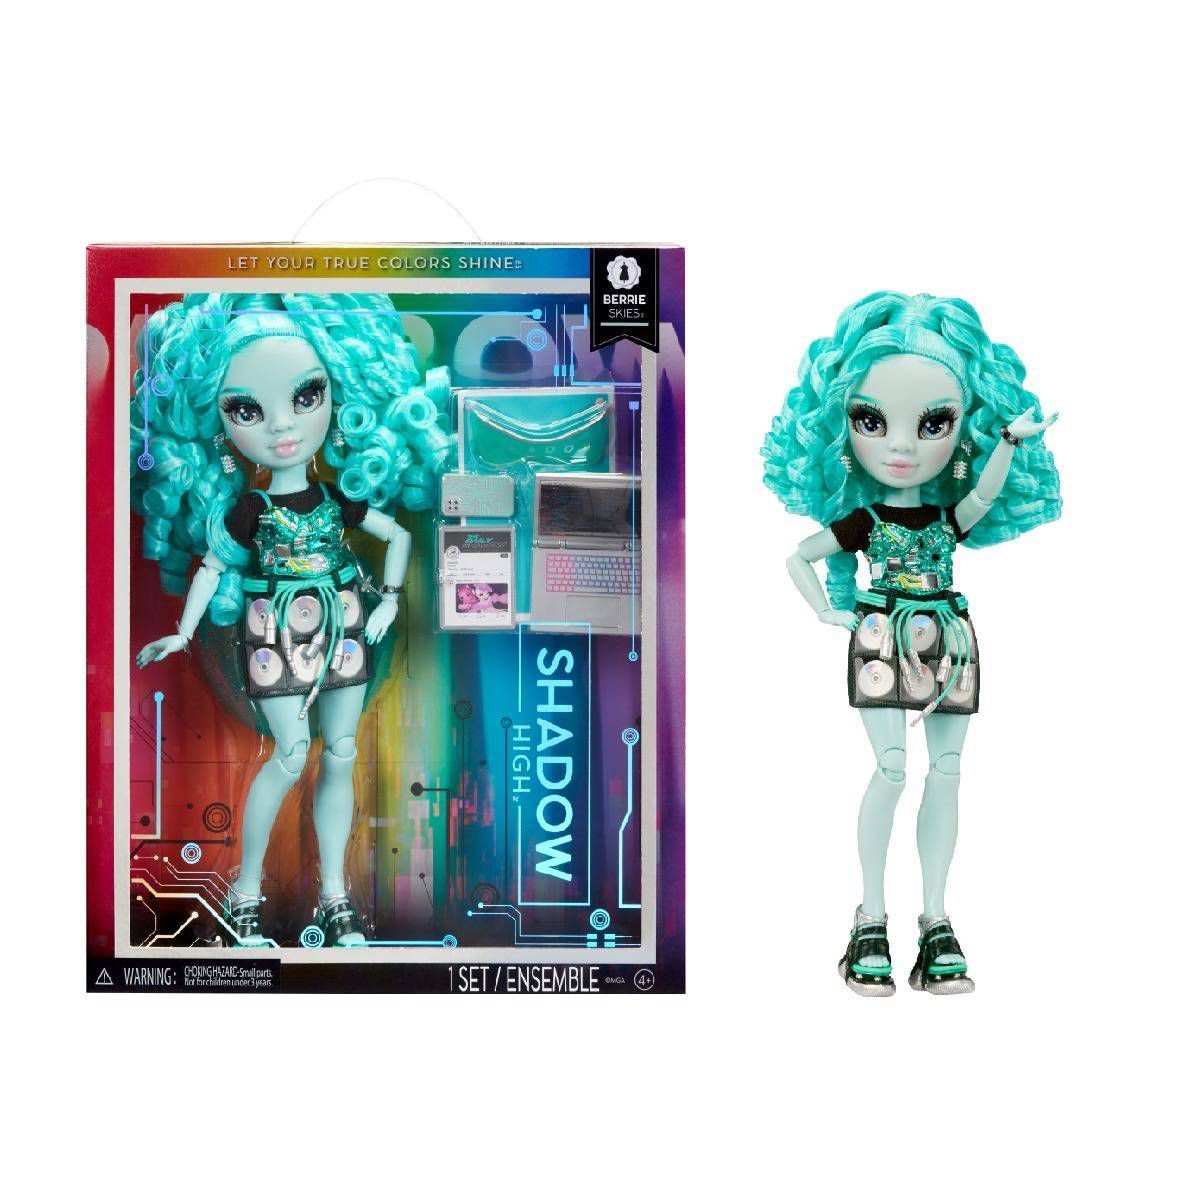 Rainbow High Shadow High Berrie - Blue Fashion Doll Outfit & 10+ Colorful Play Accessories | Target